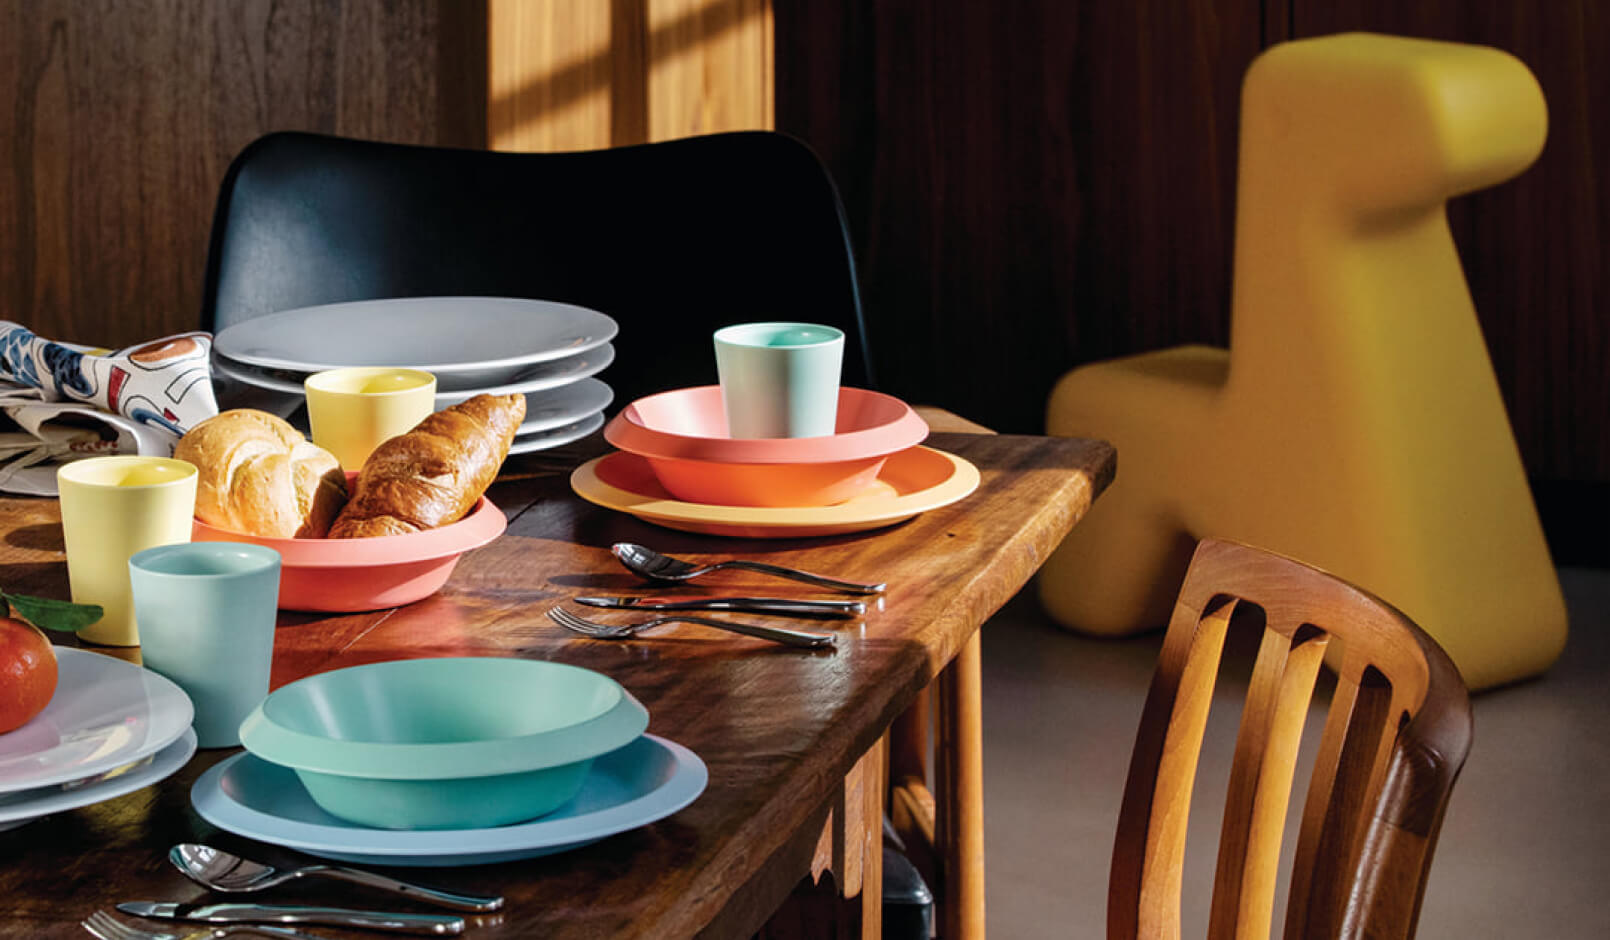 A wooden table set with pastel coloured plates, cups, and bowls.